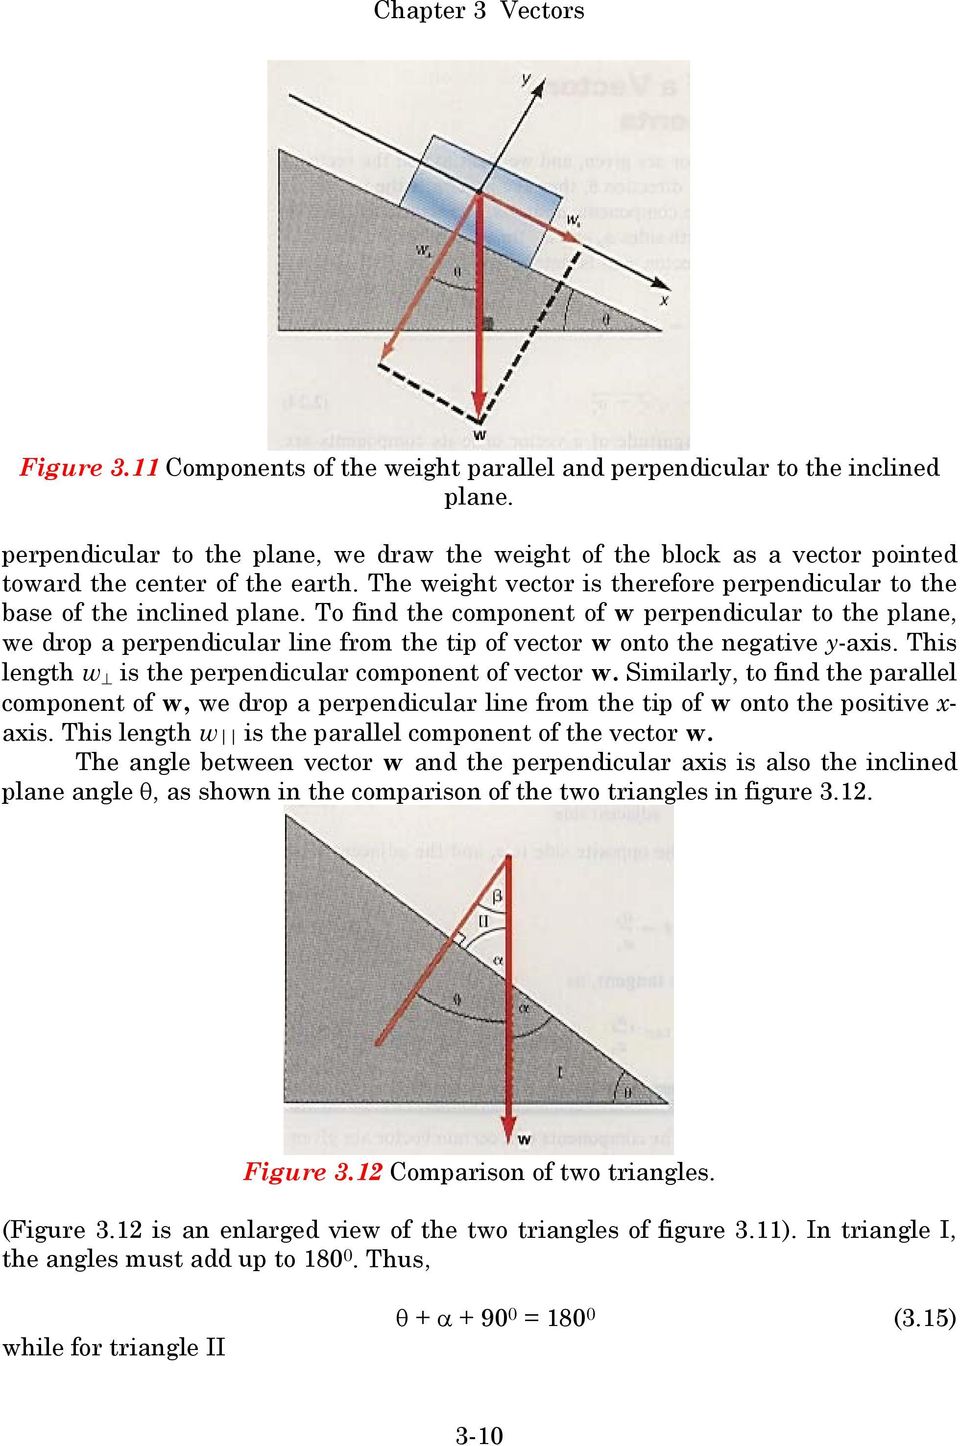 To find the component of w perpendicular to the plane, we drop a perpendicular line from the tip of vector w onto the negative y-axis. This length w is the perpendicular component of vector w.